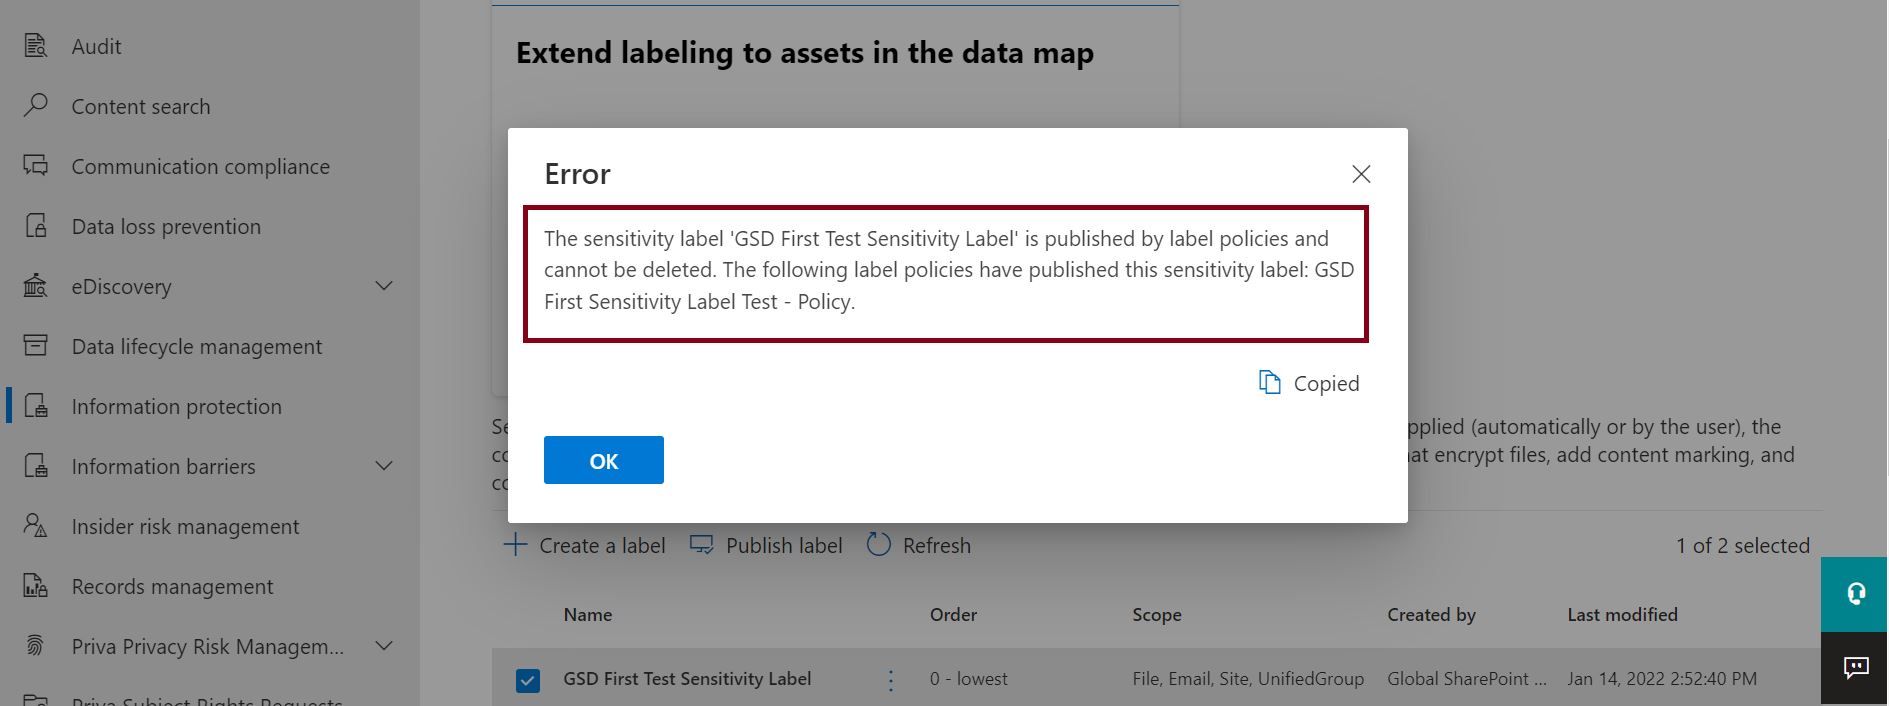 The sensitivity label is published by label policies and cannot be deleted error